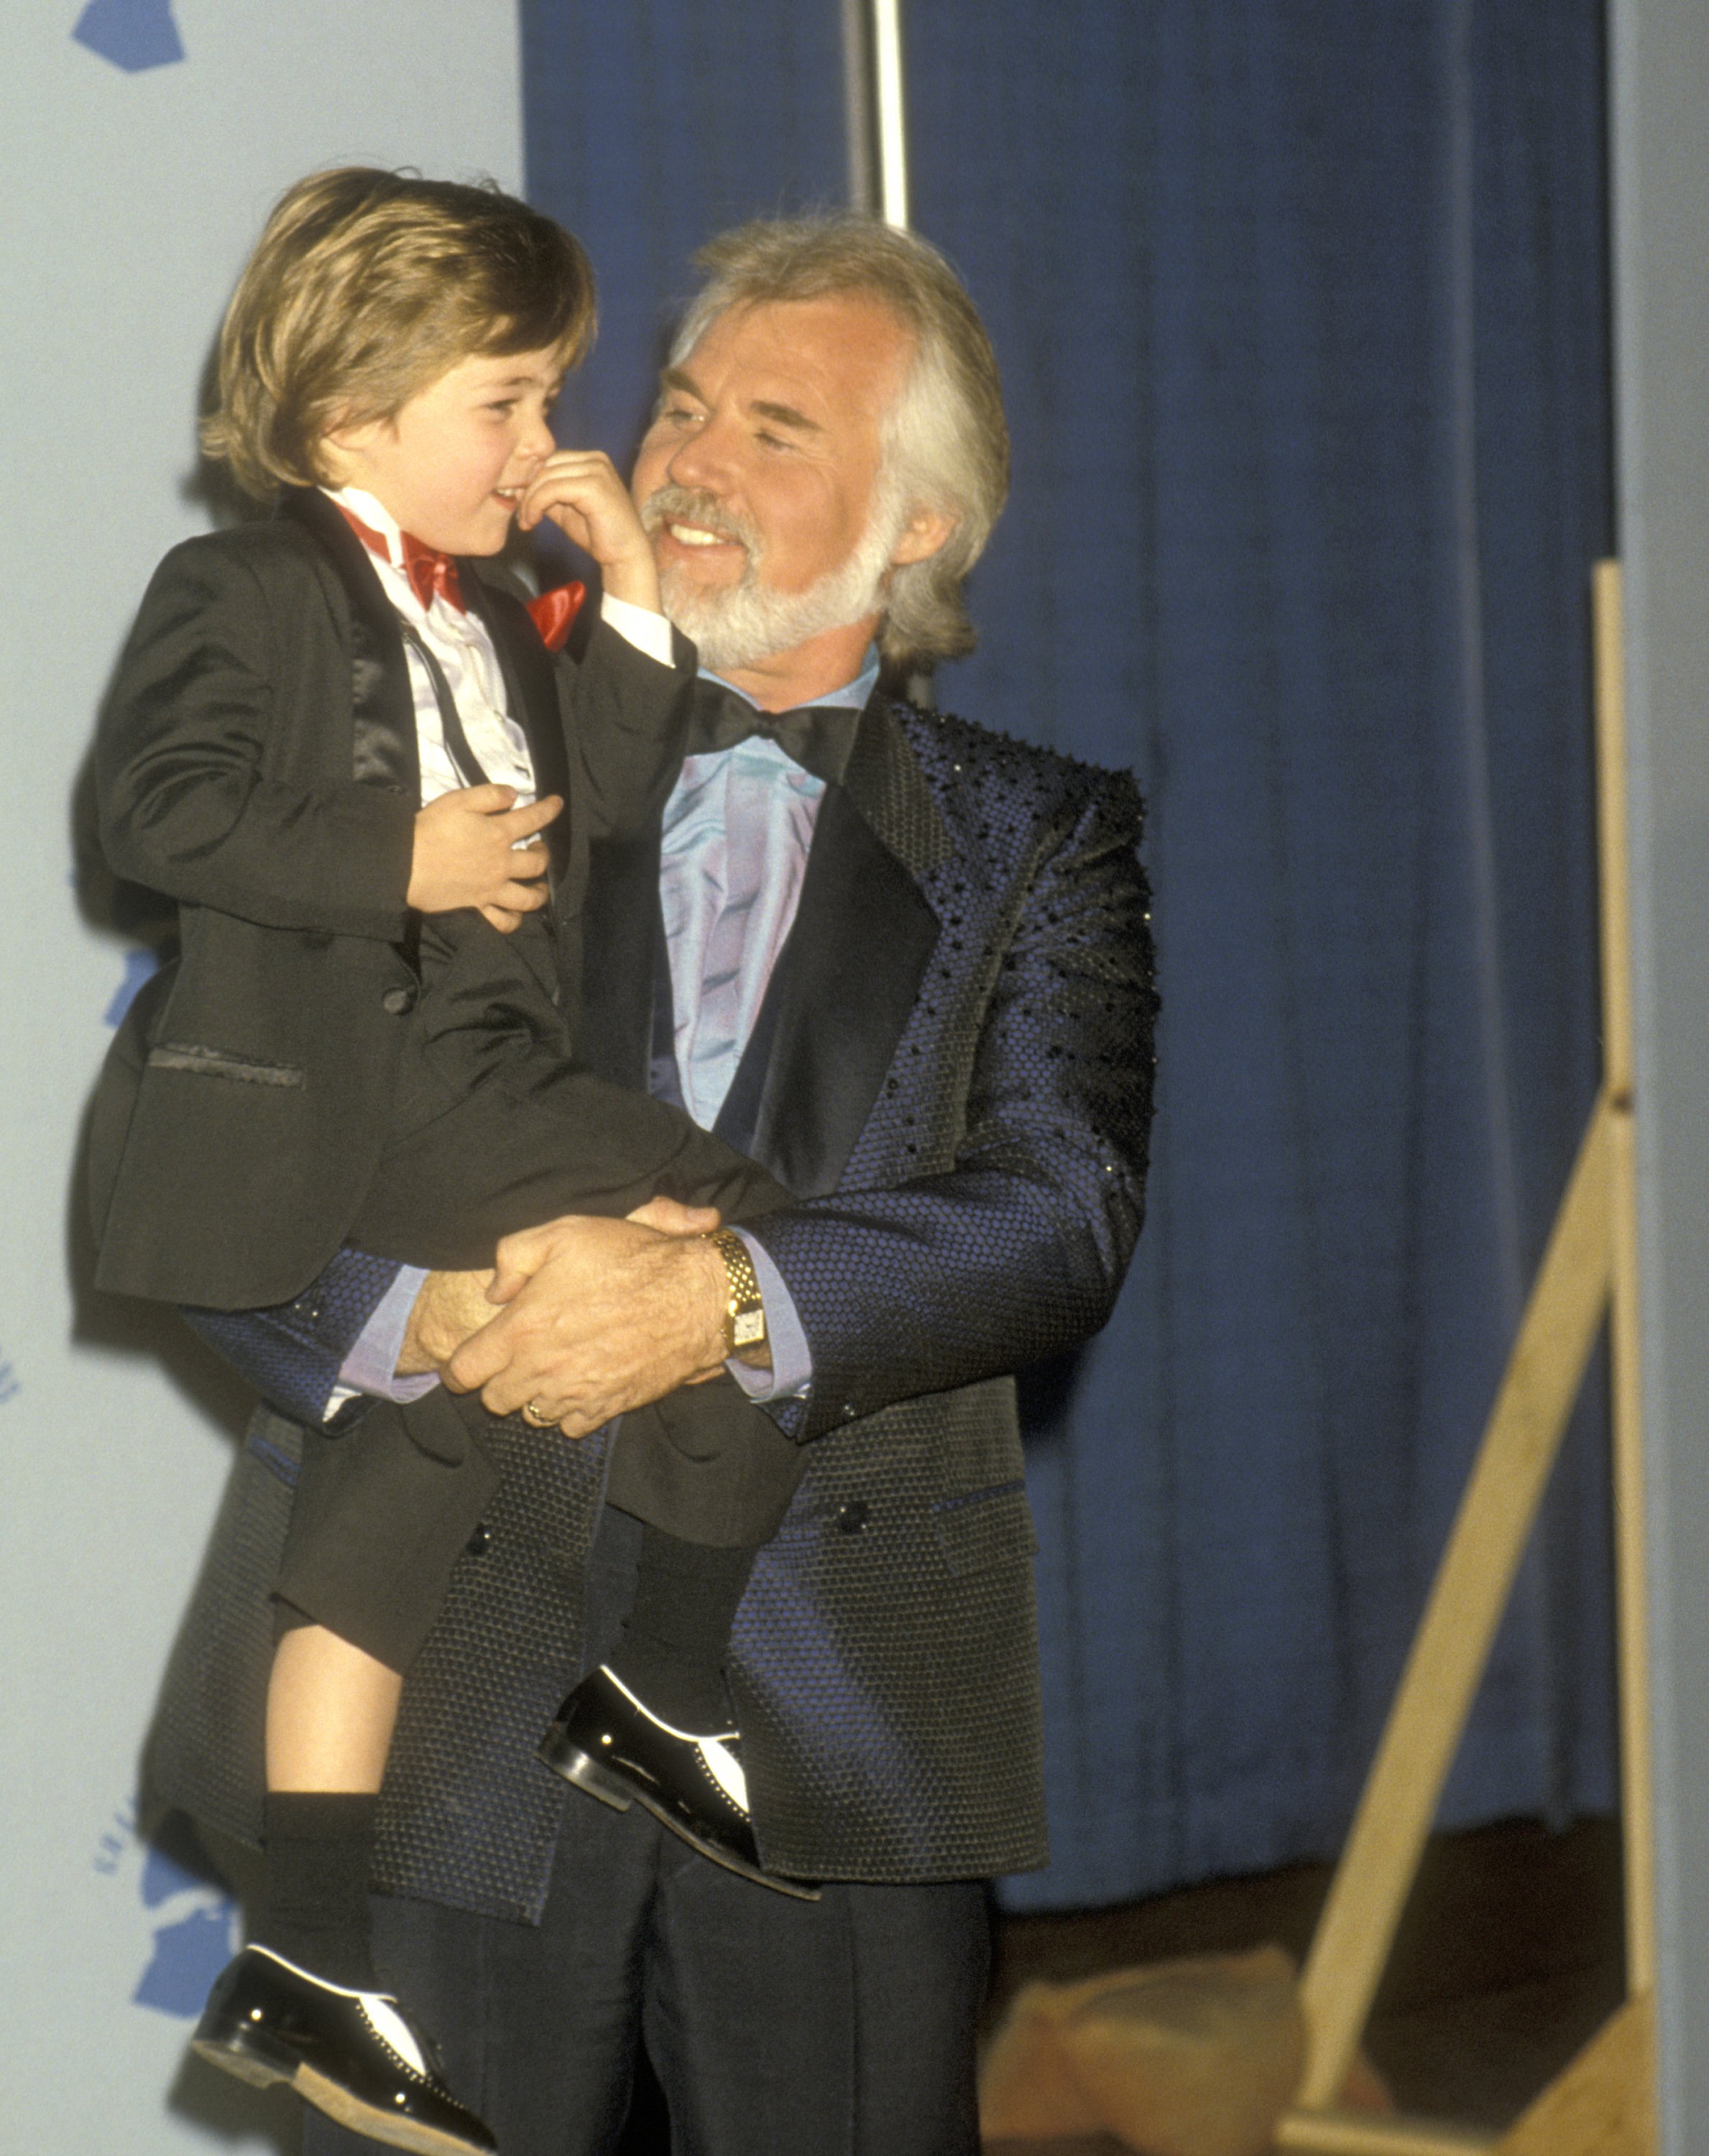 Kenny Rogers and son Christopher Gordon attend the 28th Annual Grammy Awards on February 25, 1986 at Shrine Auditorium in Los Angeles, California. | Source: Getty Images